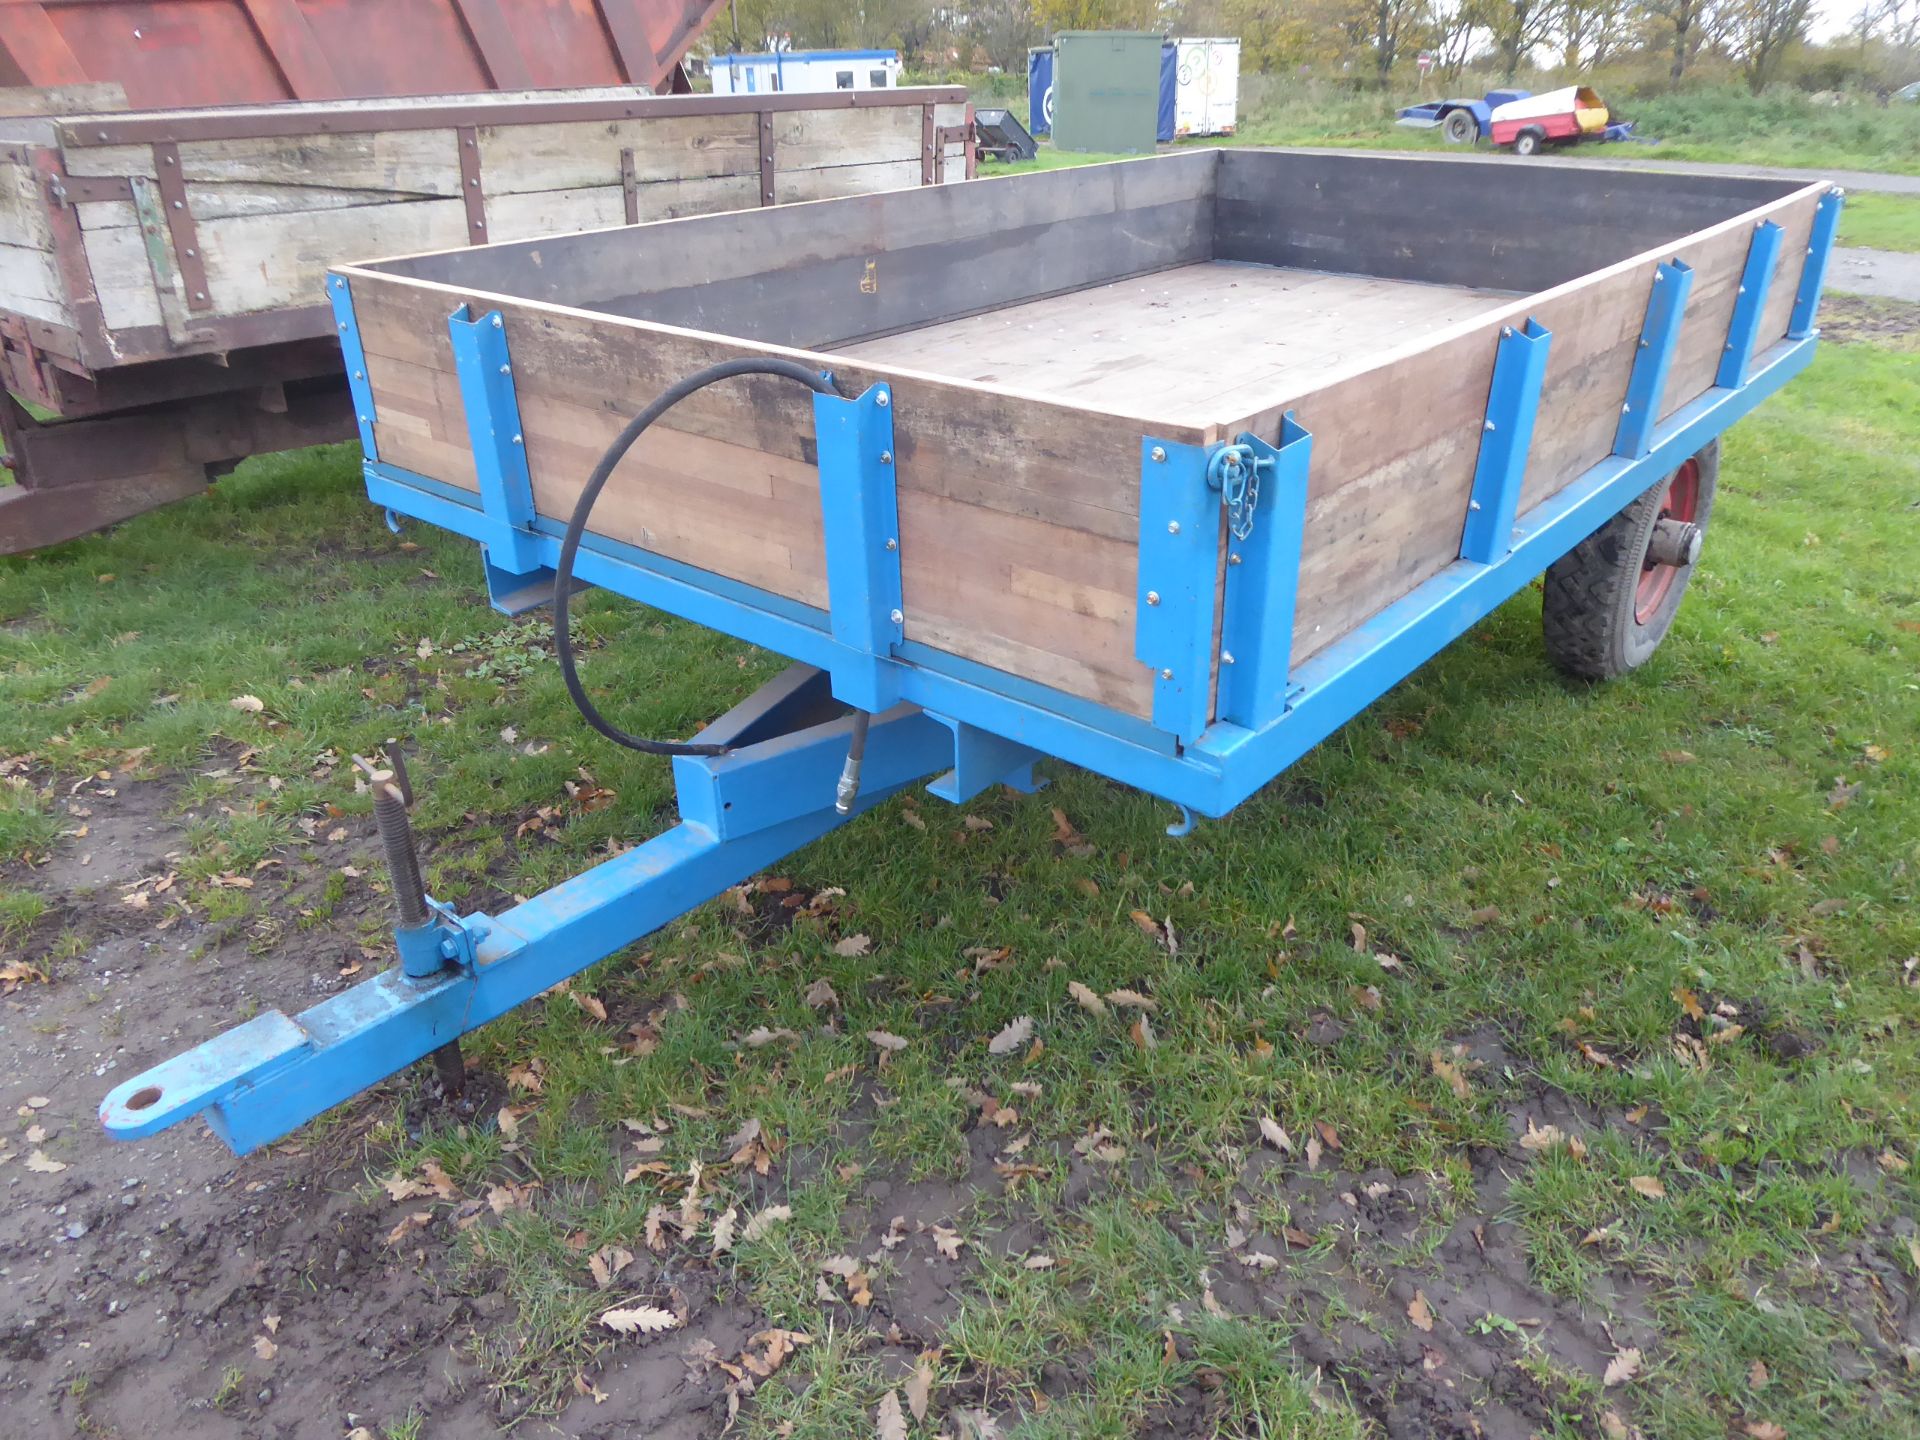 3T refurbished tipping trailer, new rams and pipe-work, new 1" thick hardwood body and new 10 ply